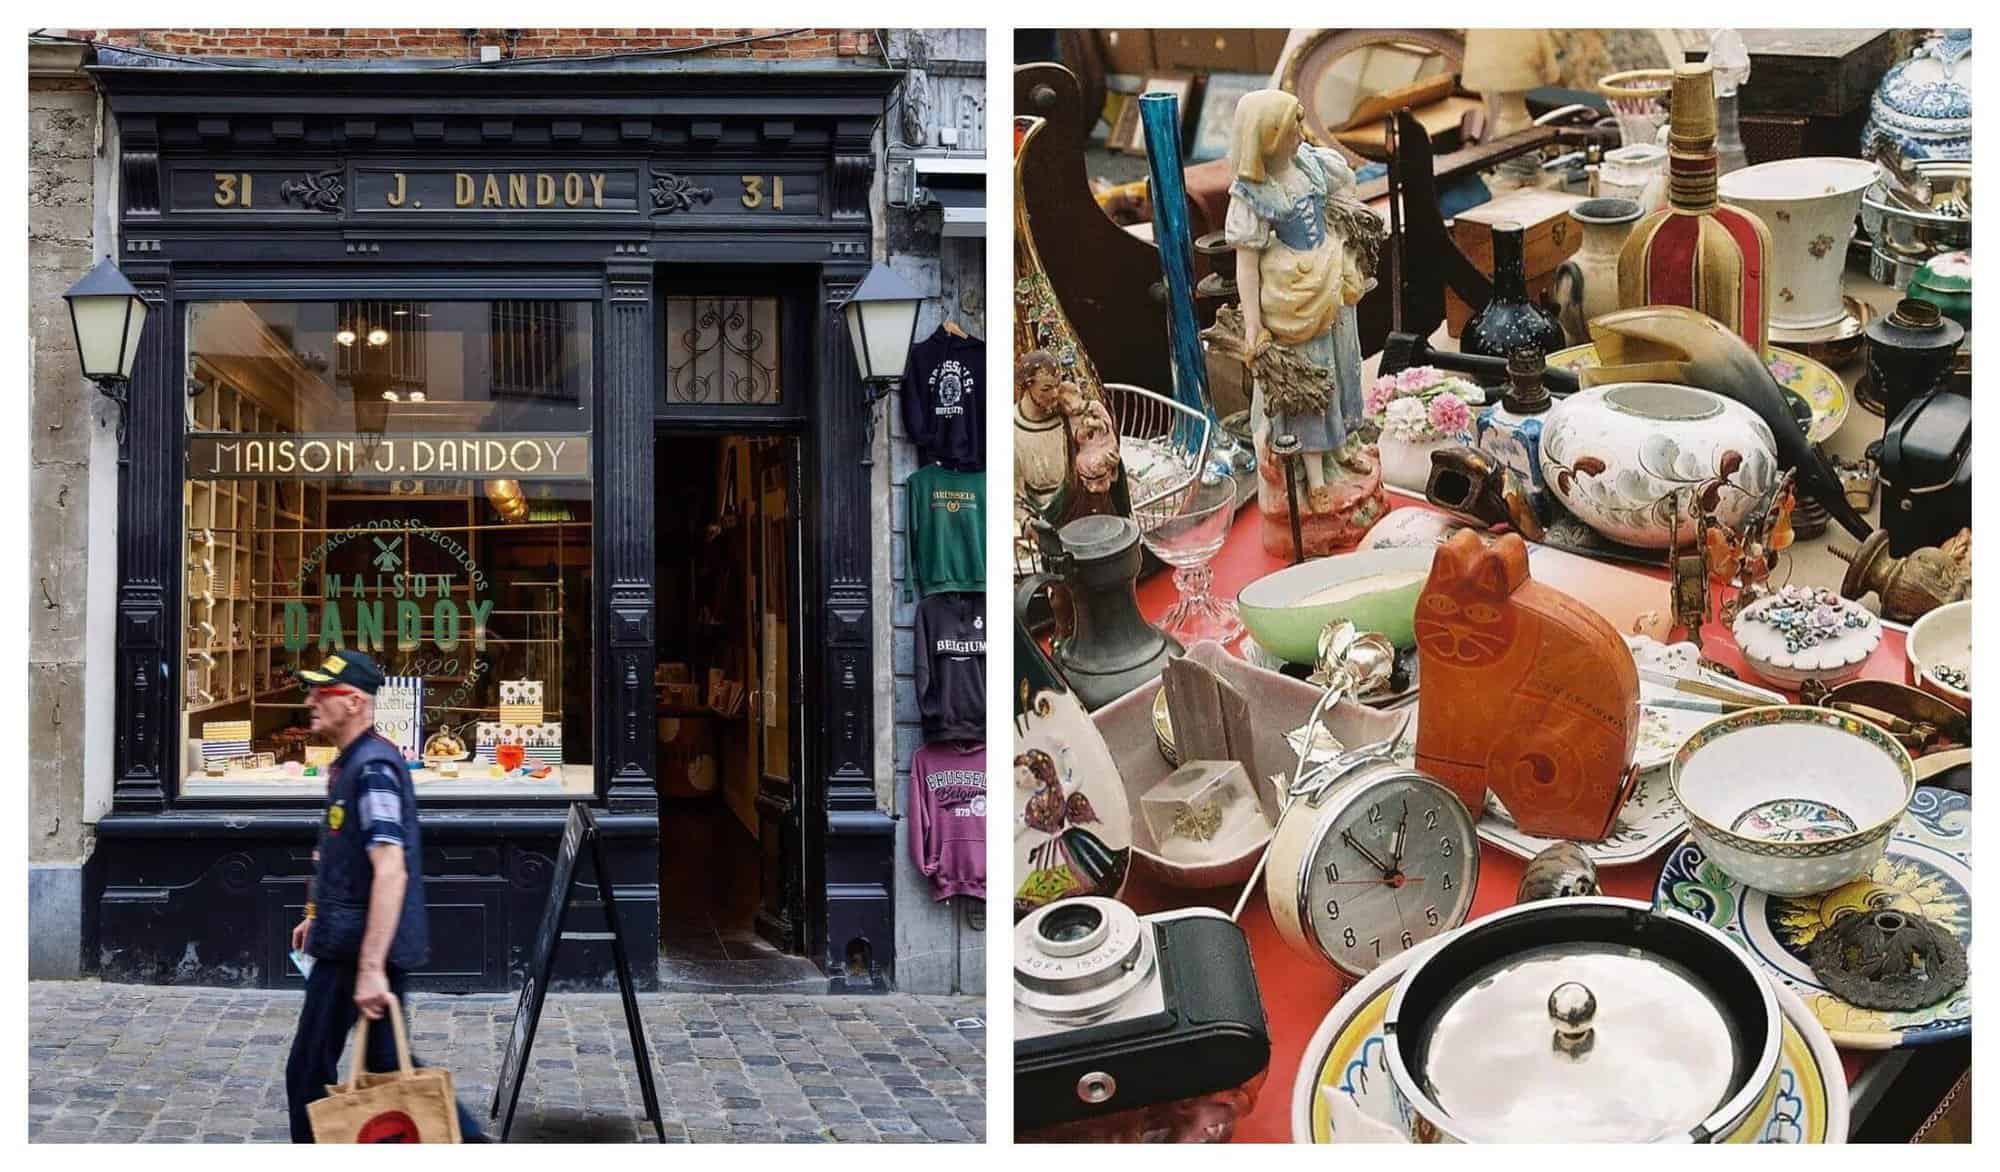 Right: The shop entrance to Maison Dandoy is covered with gold lettering Right: A table of knick-knacks, plates, clocks, old cameras, and glasses is pictured at the Jeu de Balls flea market